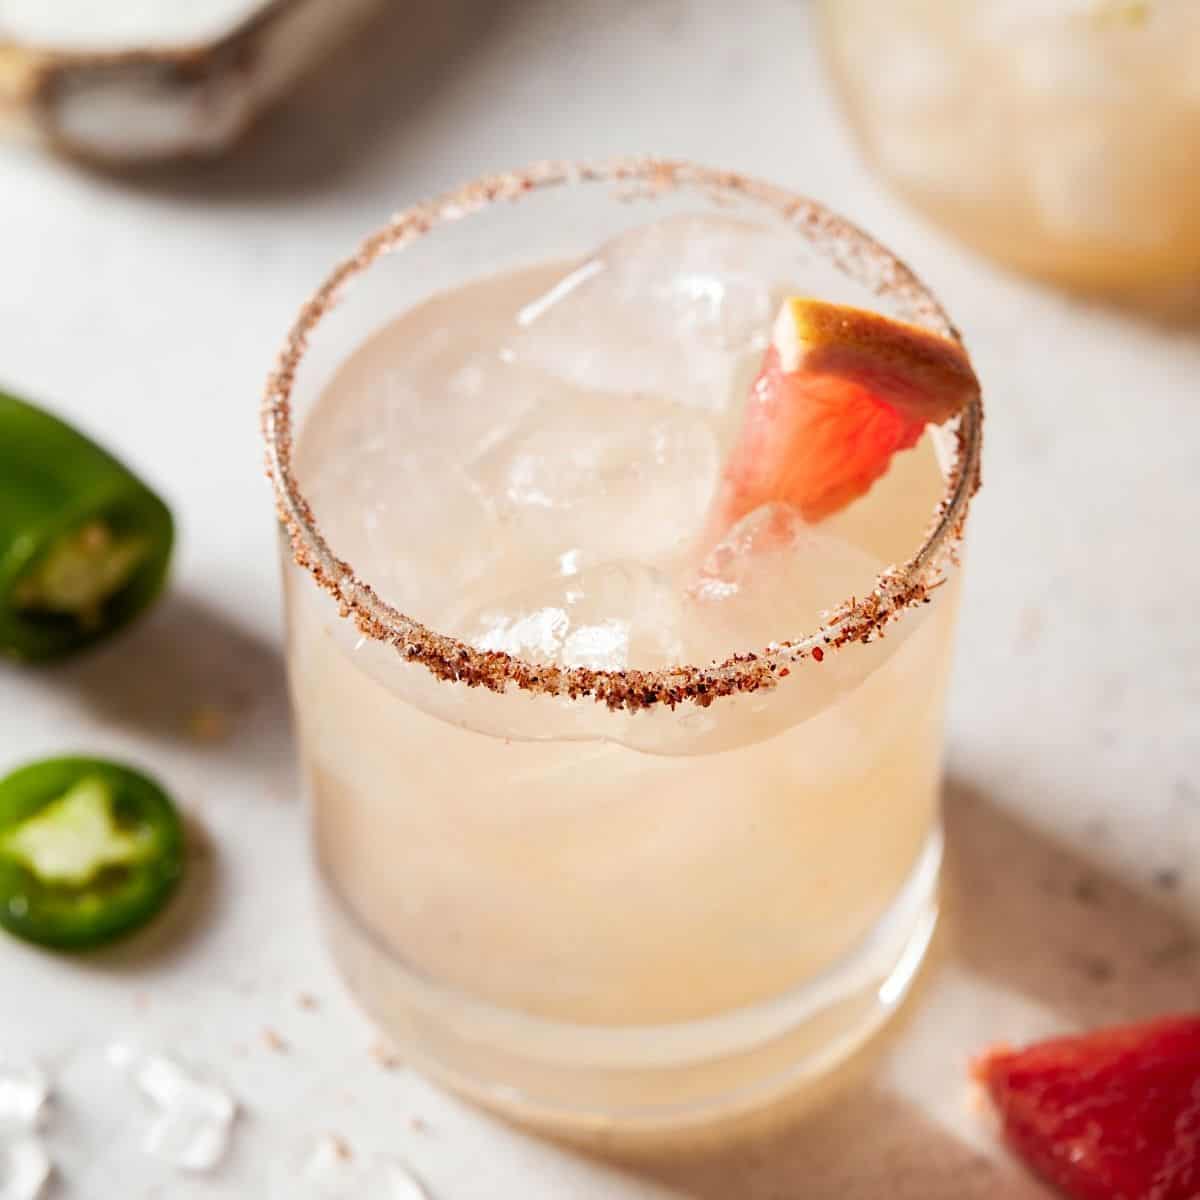 Grapefruit Margarita in a chili rimmed lowball glass.